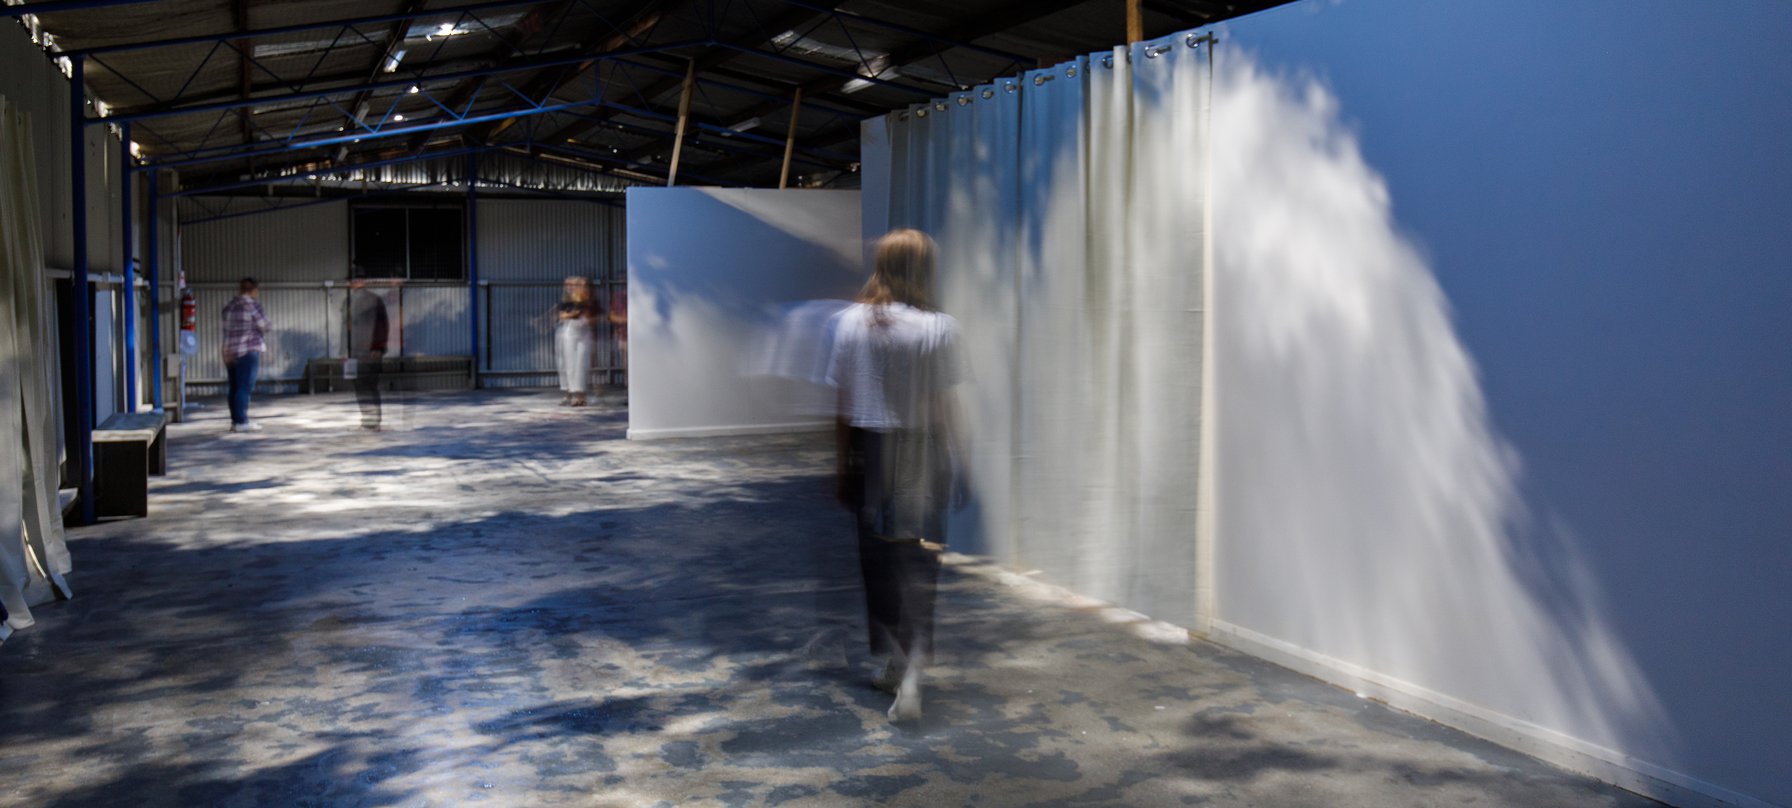 A photo of Priscilla Beck's work, 'fragile things.' A person walks through a gallery space with Pricilla's work projecting sky and clouds all around them. Credit Jesse Hunniford.